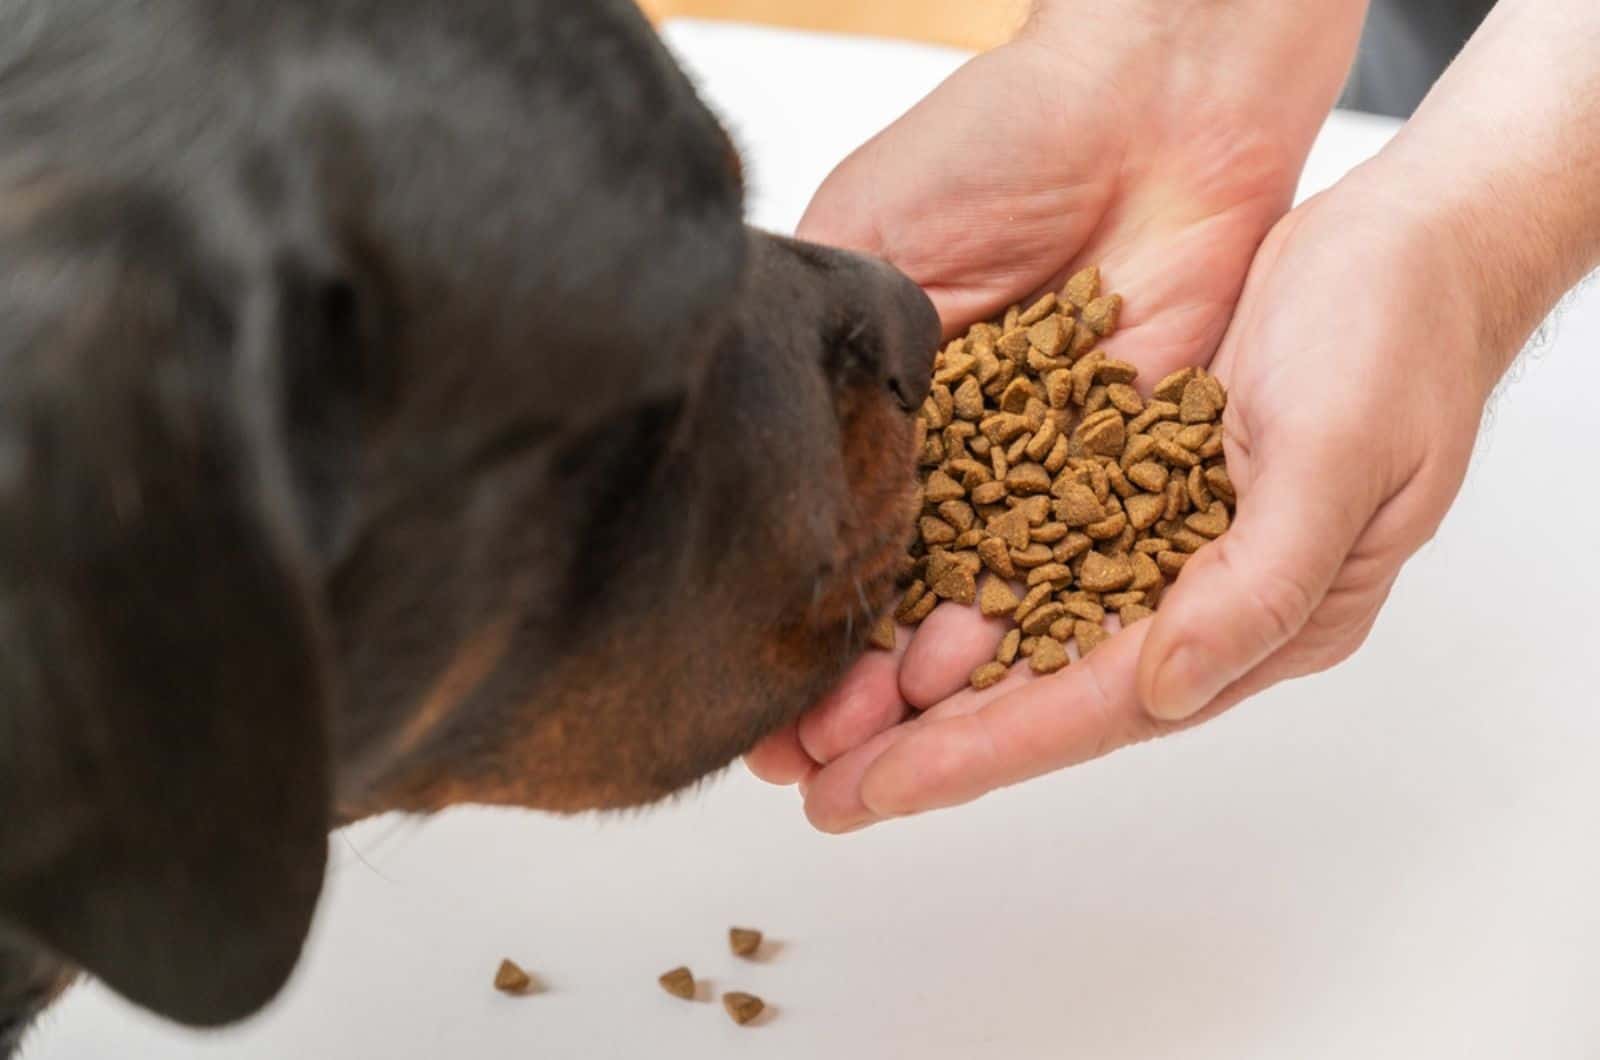 rottweiler dog eating dry food from the owner's palms